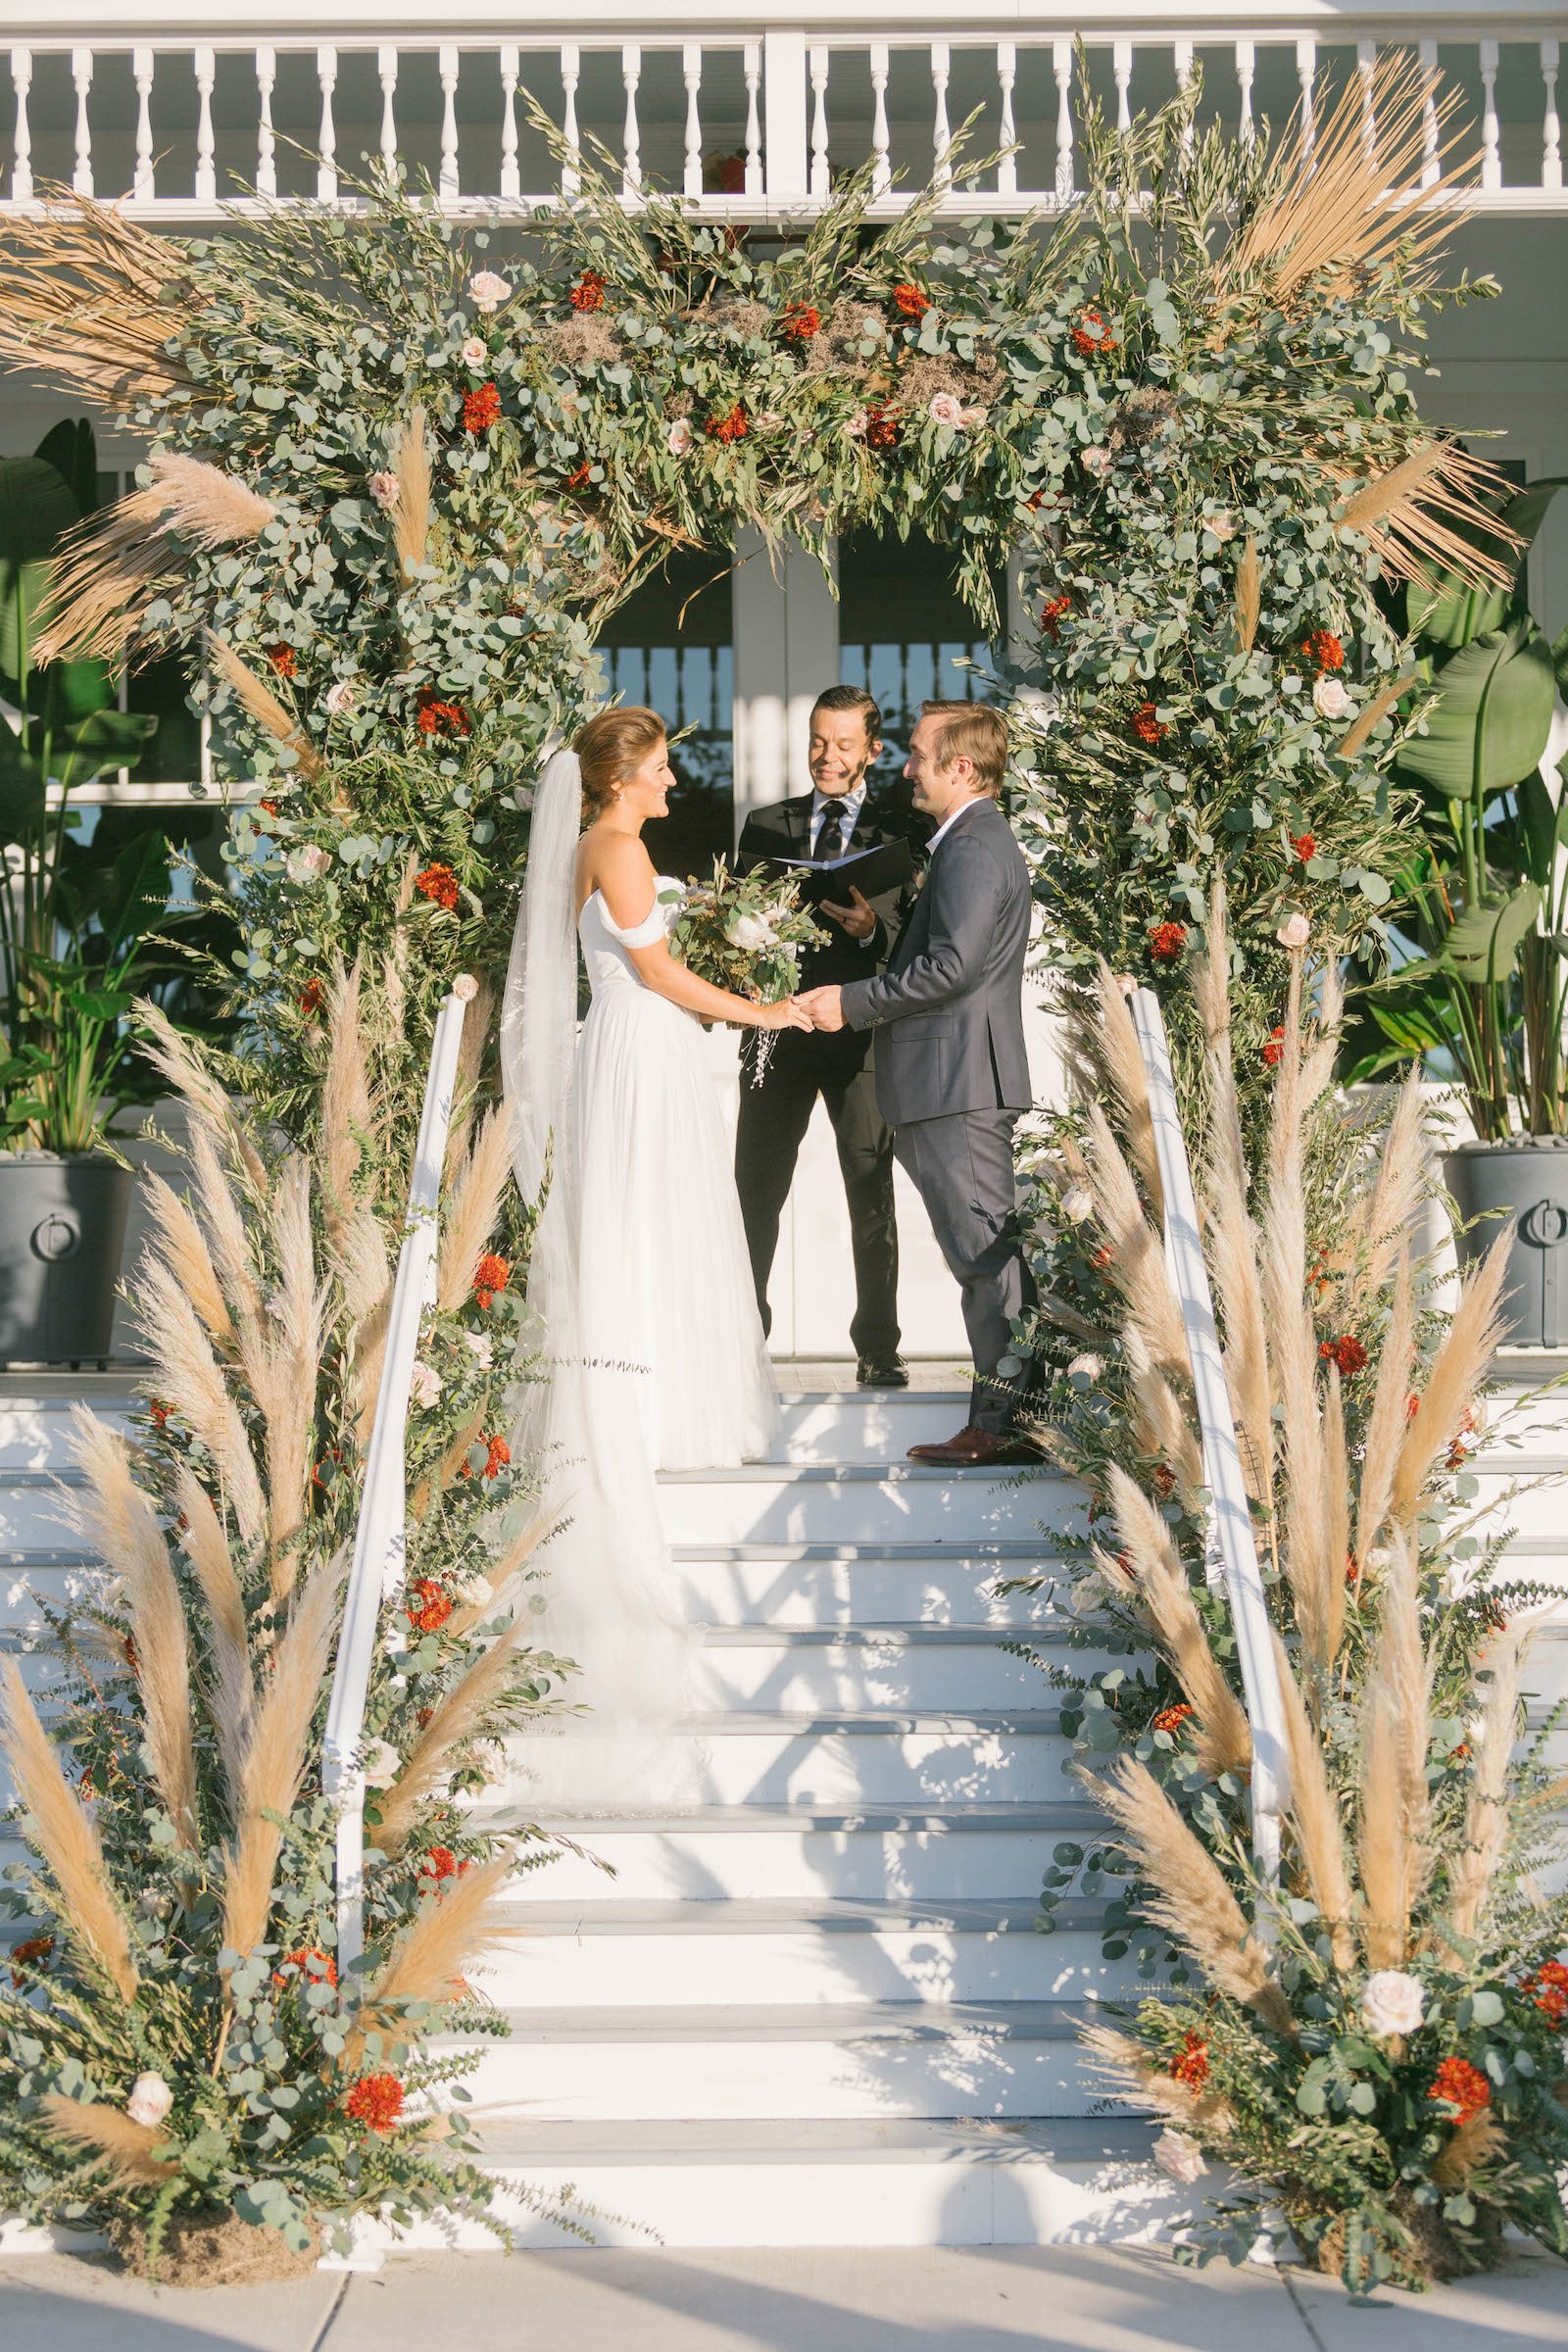 Boho Garden Wedding Ceremony, Bride and Groom Exchanging Wedding Vows Outside Florida Mansion Belleview Inn, Lush Greenery and Floral Arch with Pampas Grass Arrangements| Tampa Bay Wedding Planner Parties A'la Carte